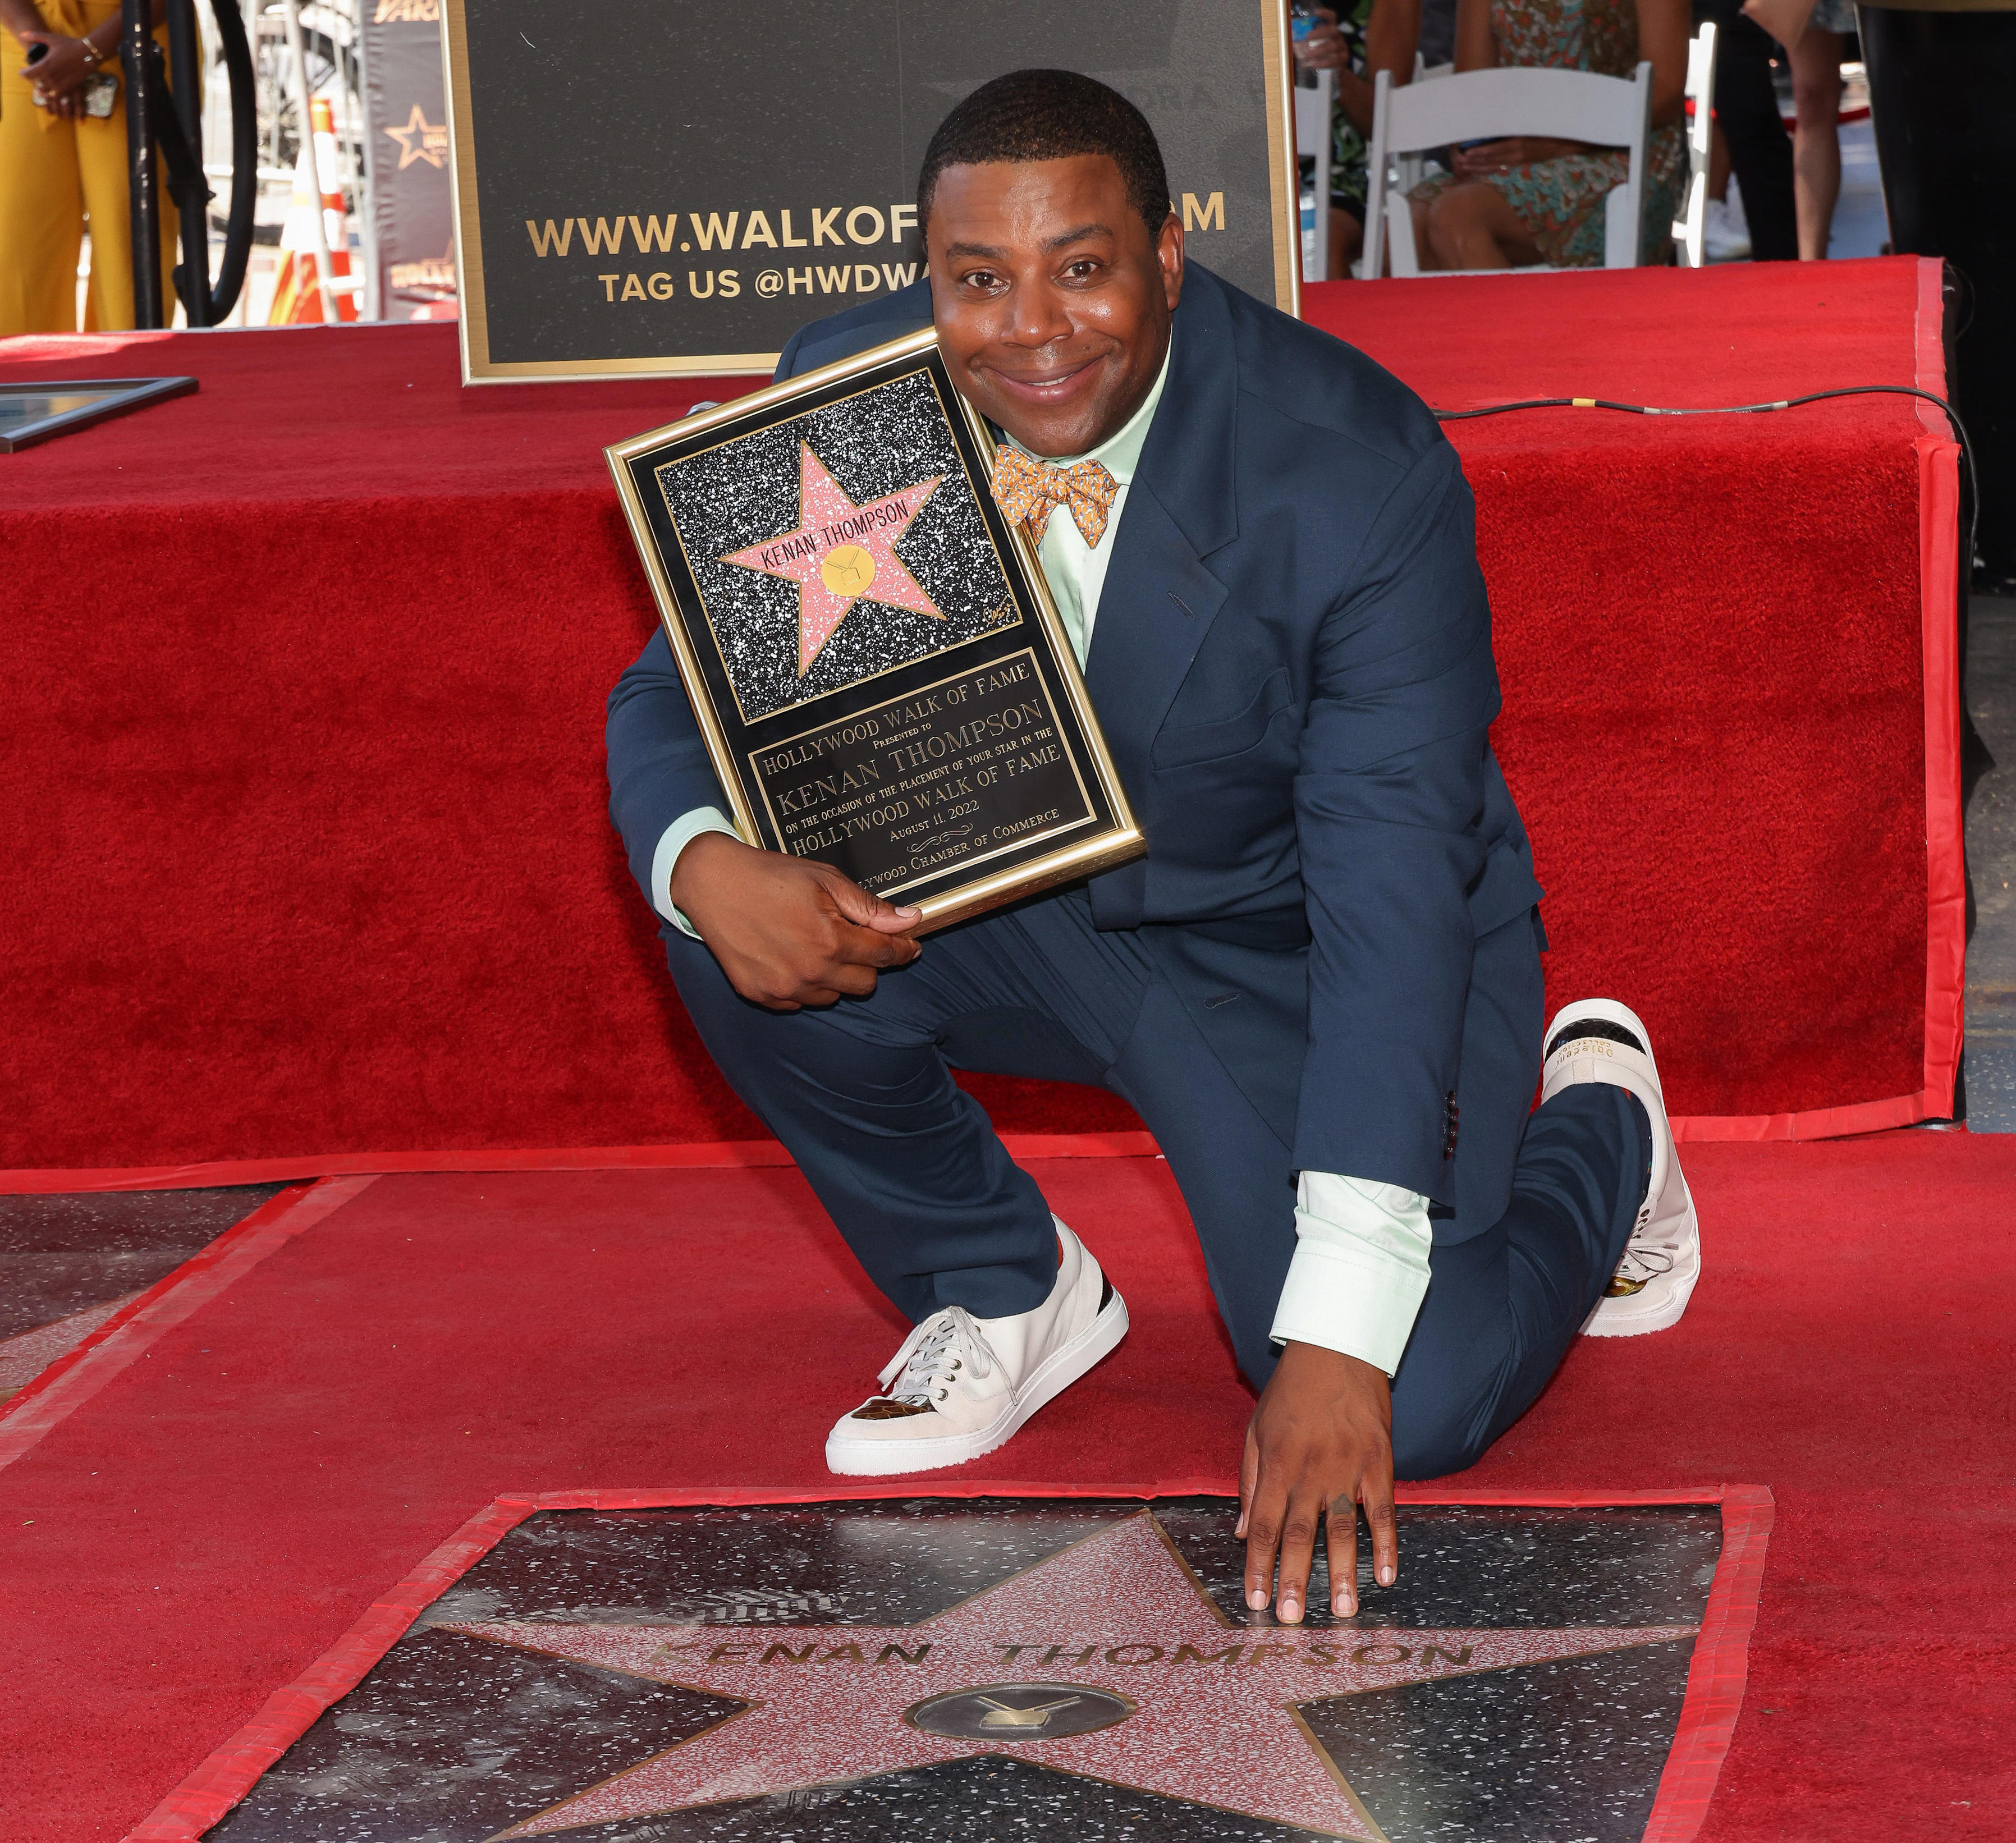 "Saturday Night Live" star Kenan Thompson brought the laughs to his star ceremony on Aug. 11, 2022.